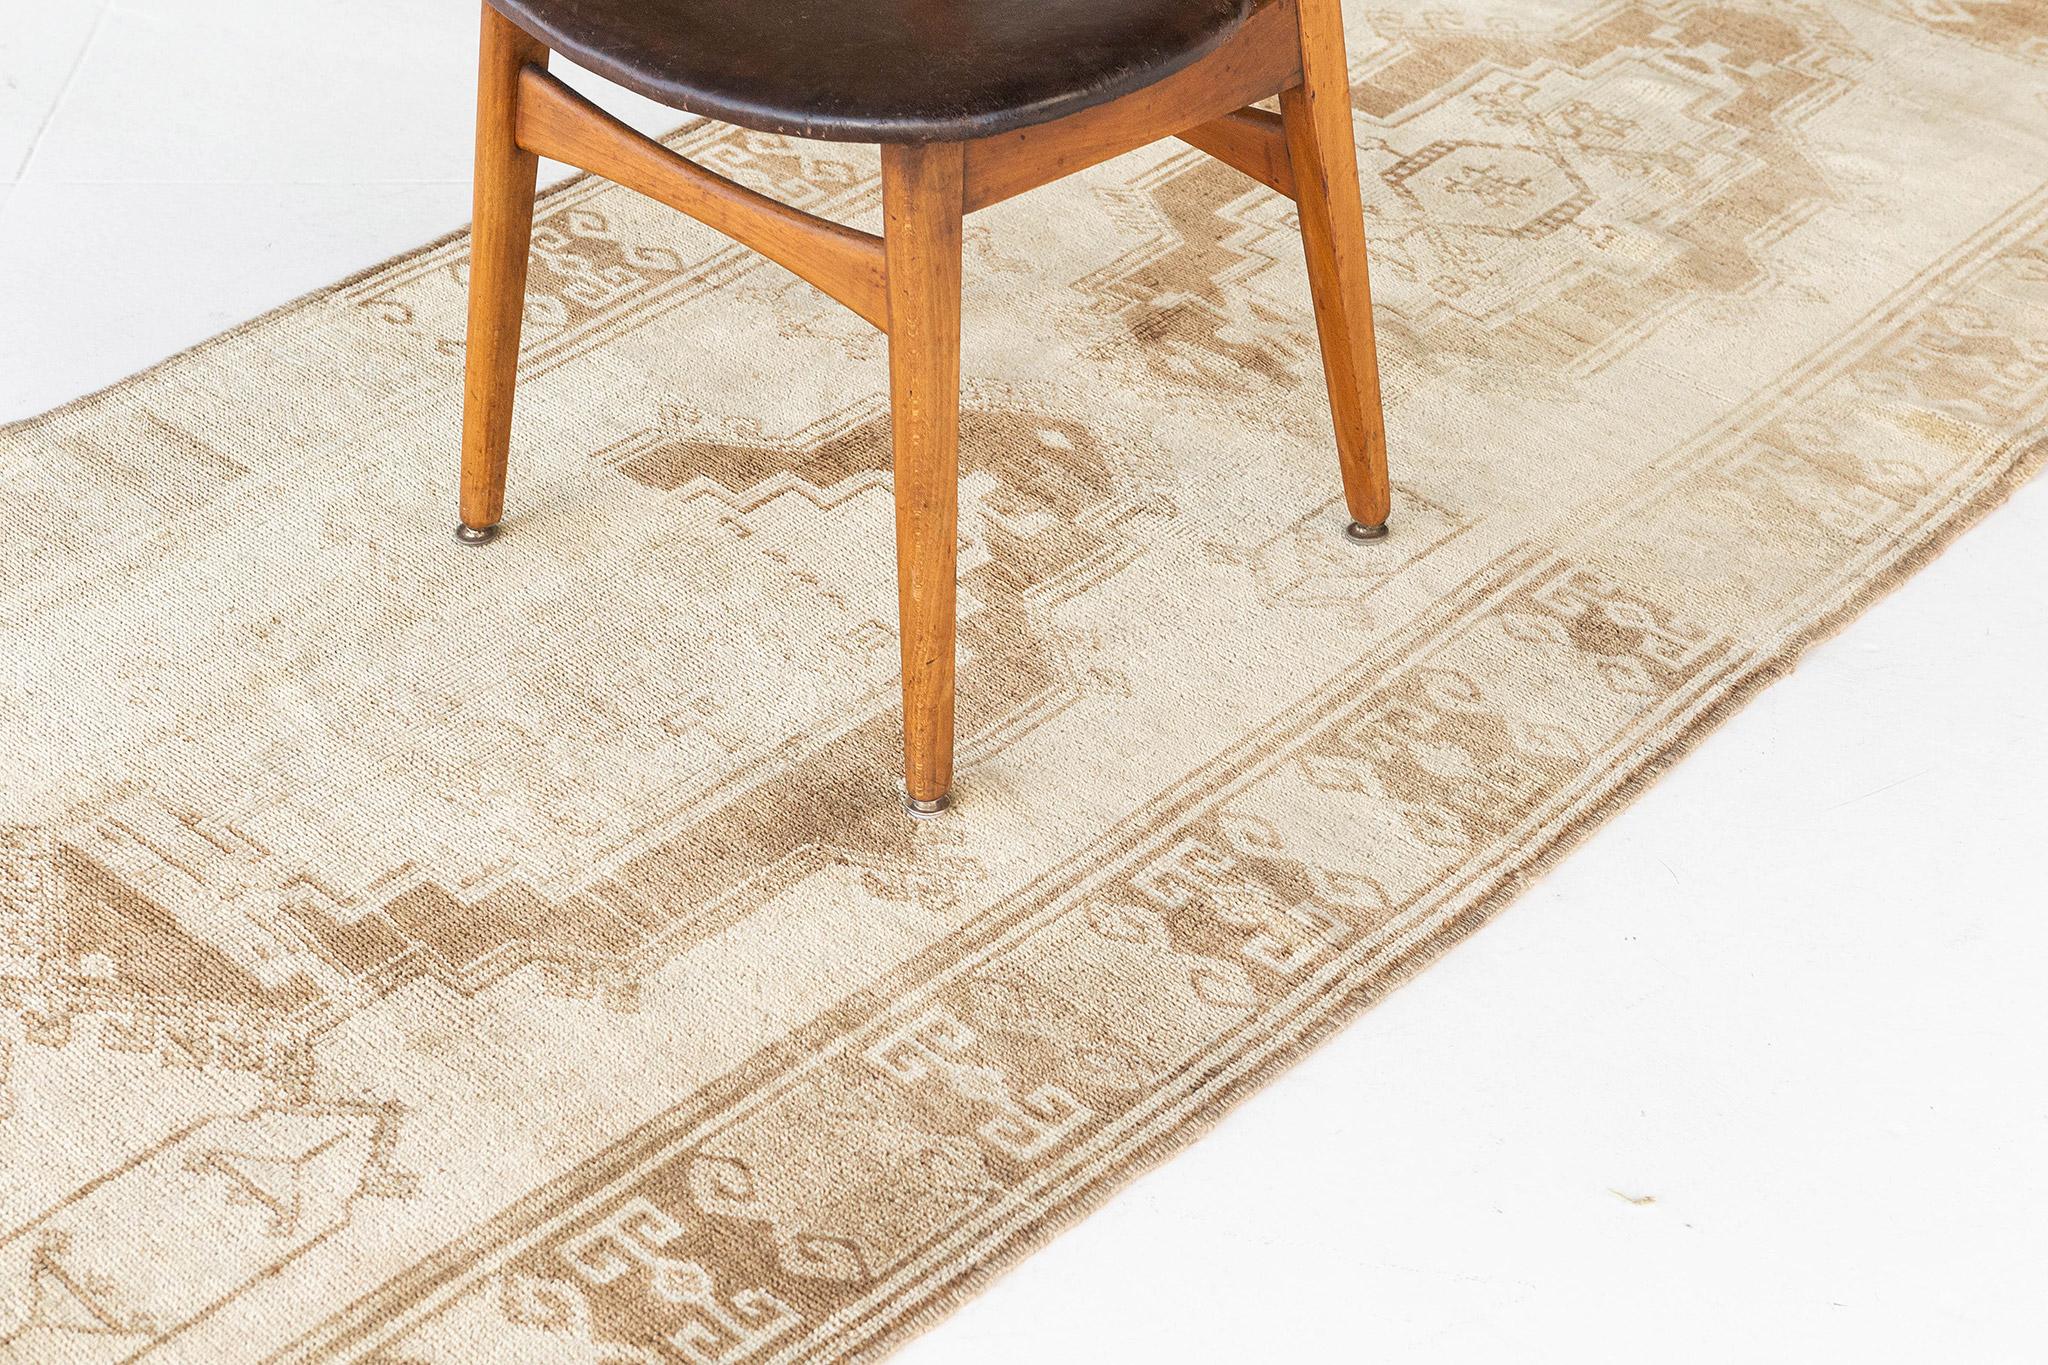 Mehraban Vintage Turkish Anatolian Runner In Good Condition For Sale In WEST HOLLYWOOD, CA